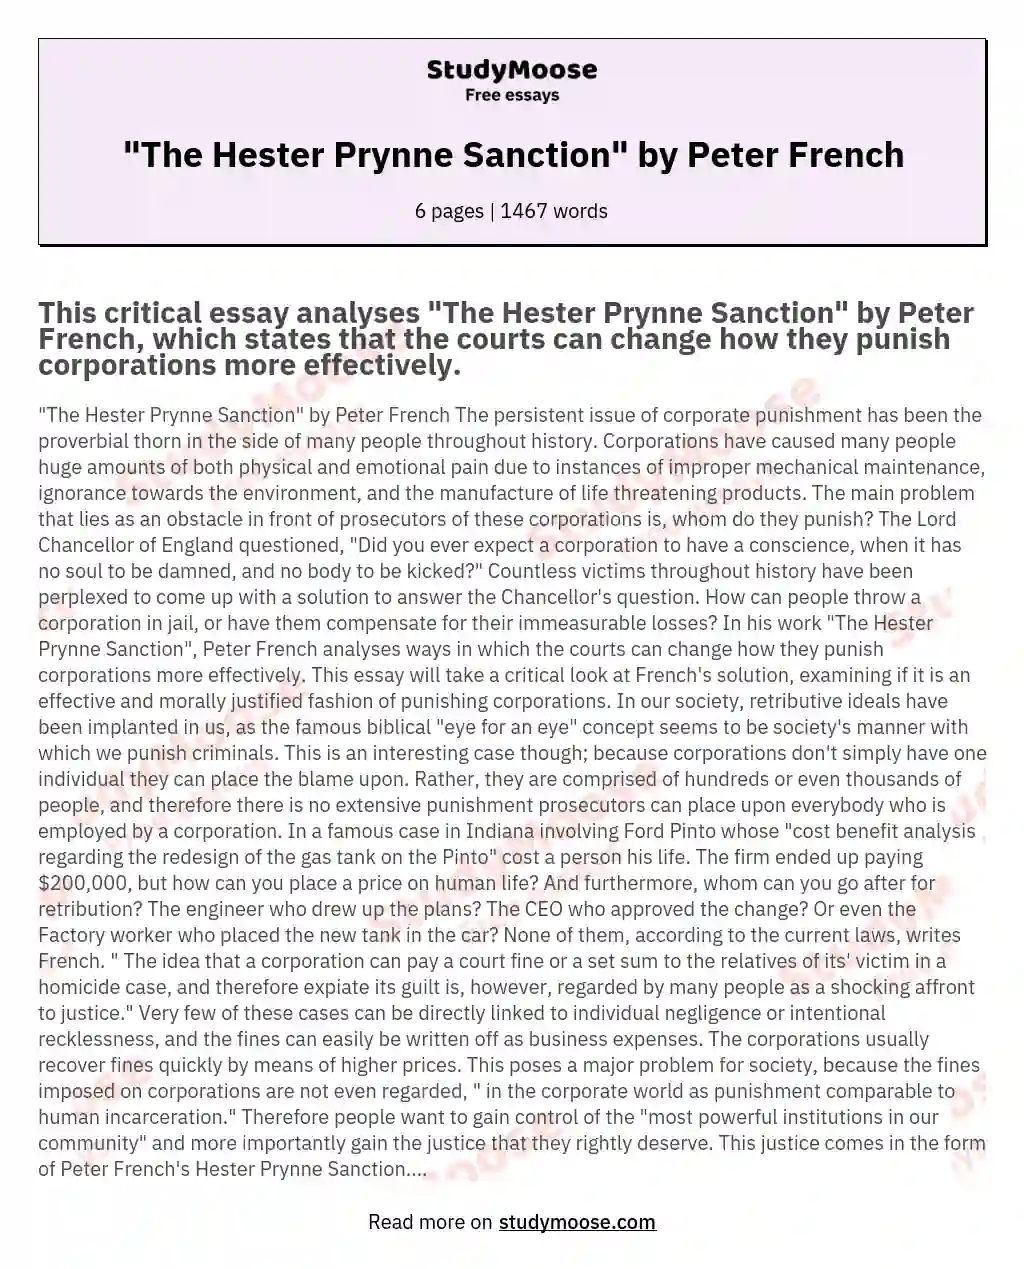 "The Hester Prynne Sanction" by Peter French